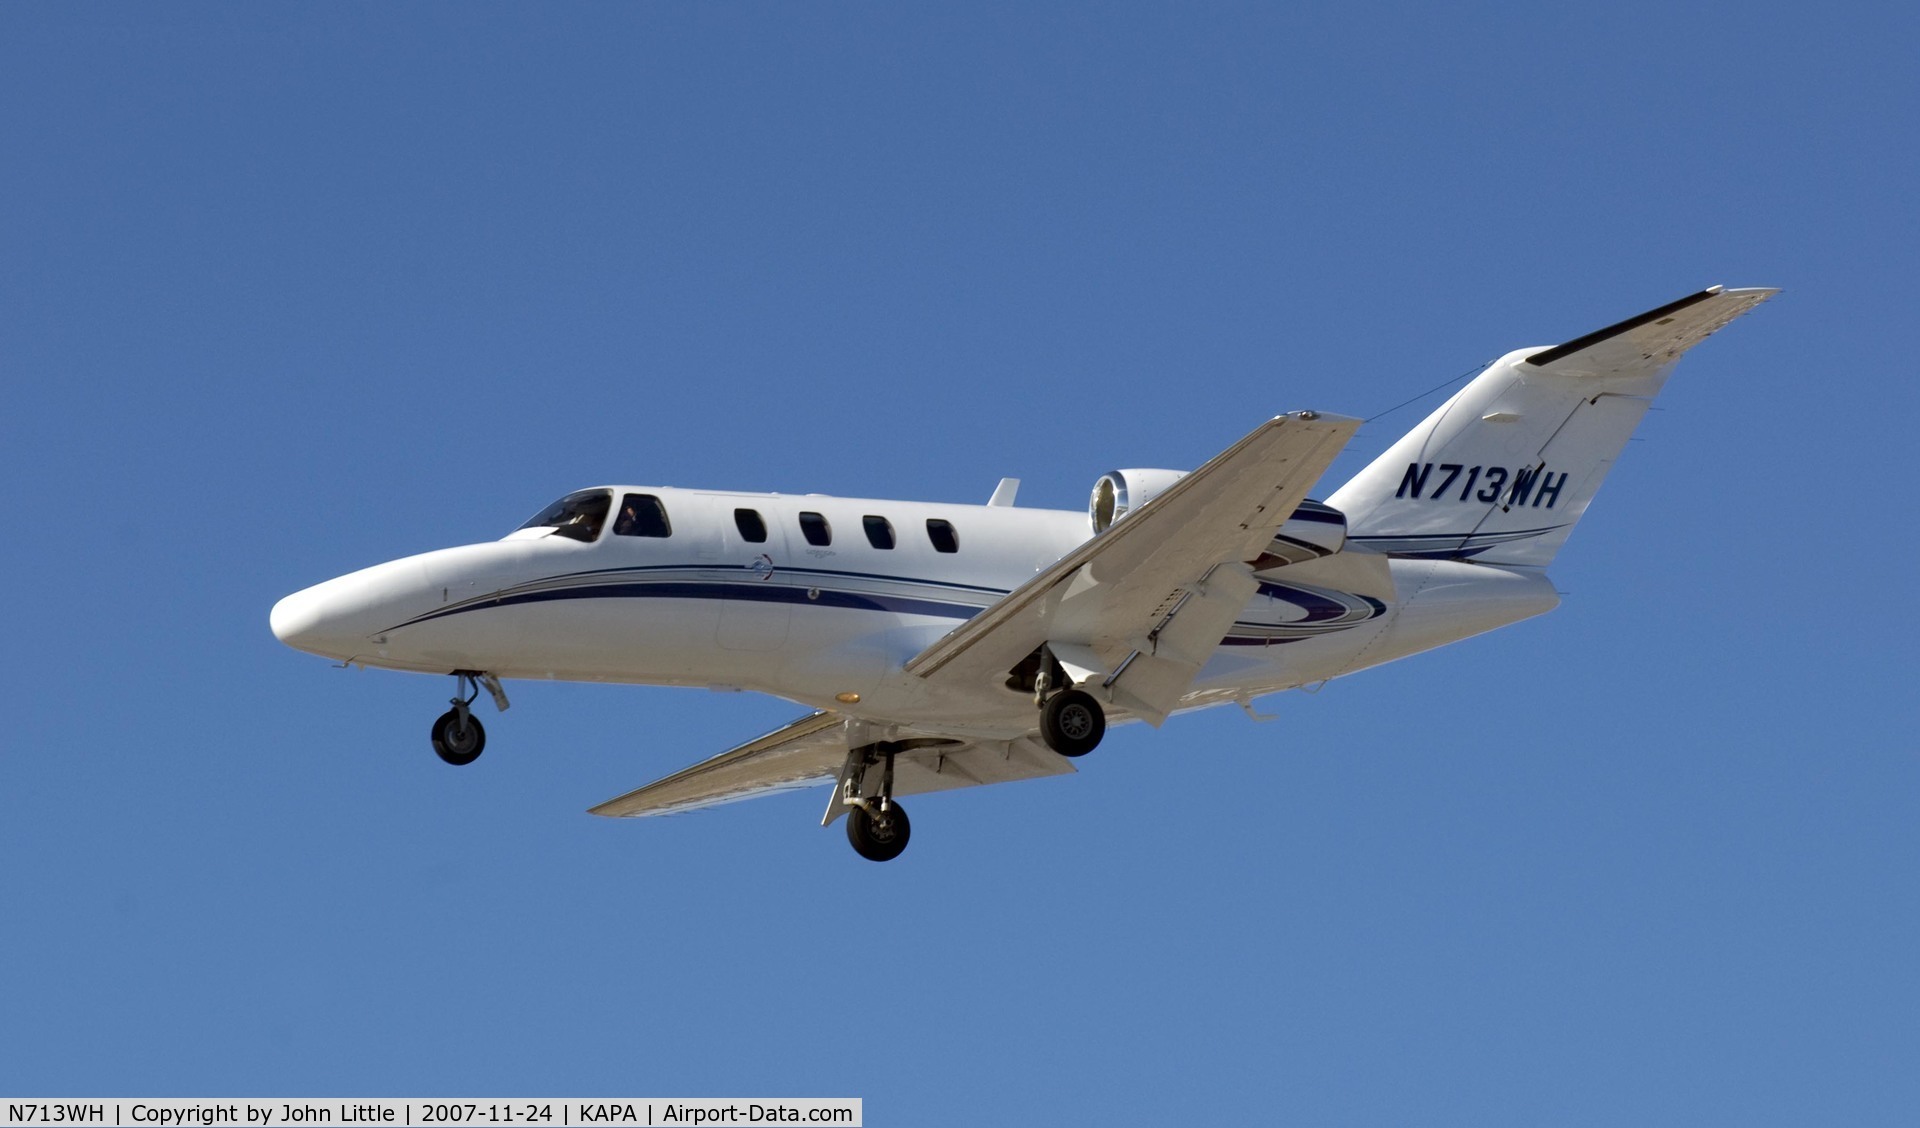 N713WH, 2005 Cessna 525 CitationJet CJ1+ C/N 525-0606, Over the numbers to 17L